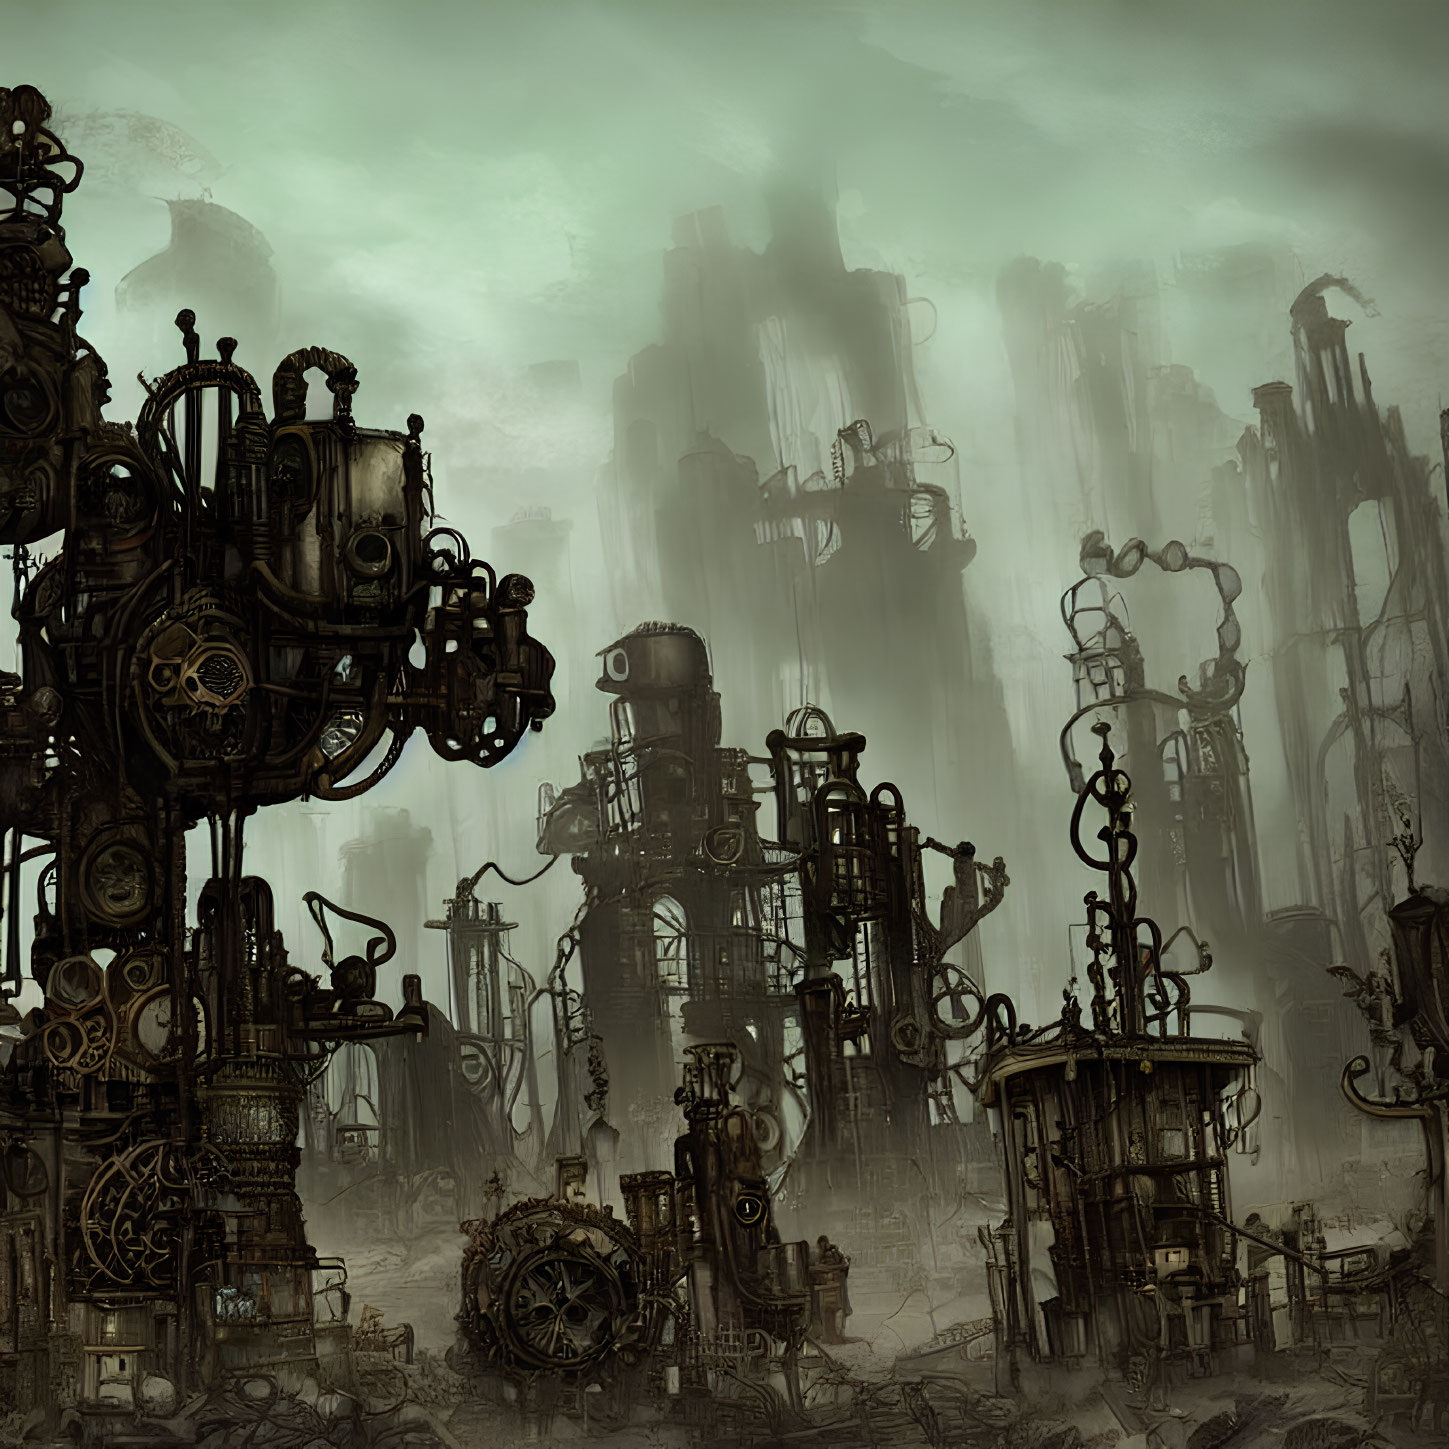 Dystopian landscape with towering machinery and dilapidated structures